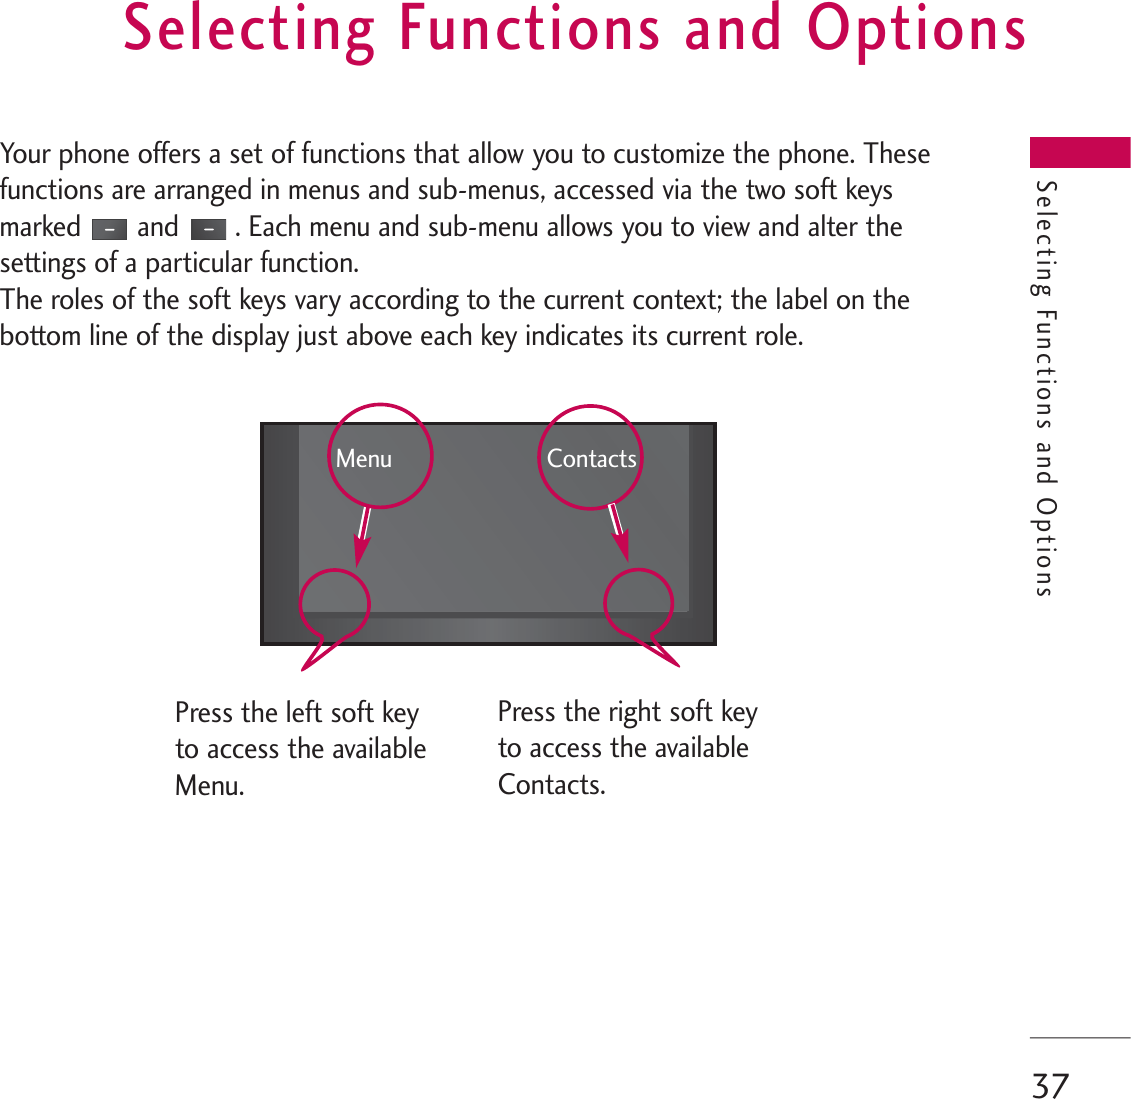 Selecting Functions and Options37Your phone offers a set of functions that allow you to customize the phone. Thesefunctions are arranged in menus and sub-menus, accessed via the two soft keysmarked and . Each menu and sub-menu allows you to view and alter thesettings of a particular function.The roles of the soft keys vary according to the current context; the label on thebottom line of the display just above each key indicates its current role.Selecting Functions and OptionsPress the left soft keyto access the availableMenu.Press the right soft keyto access the availableContacts.Menu Contacts